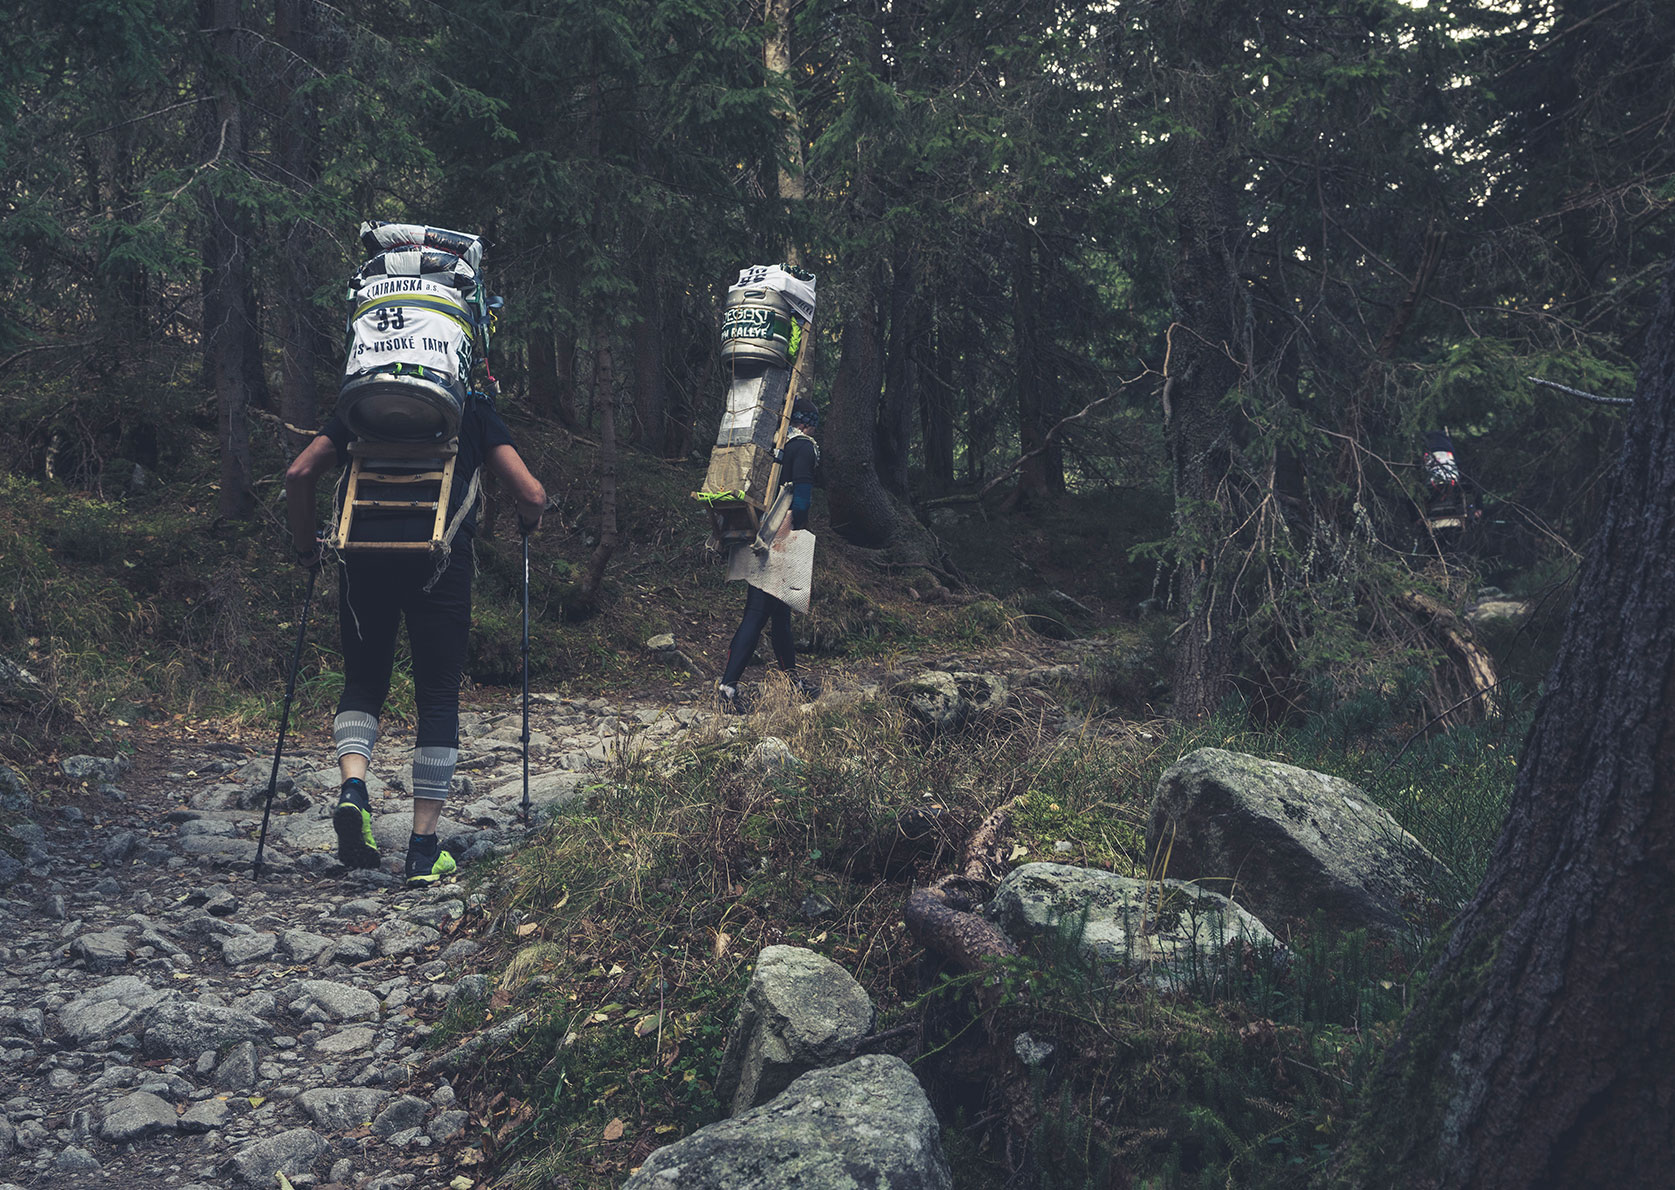 Two participants in the Tatra Sherpa Rally carrying their heavy frame packs though a wood